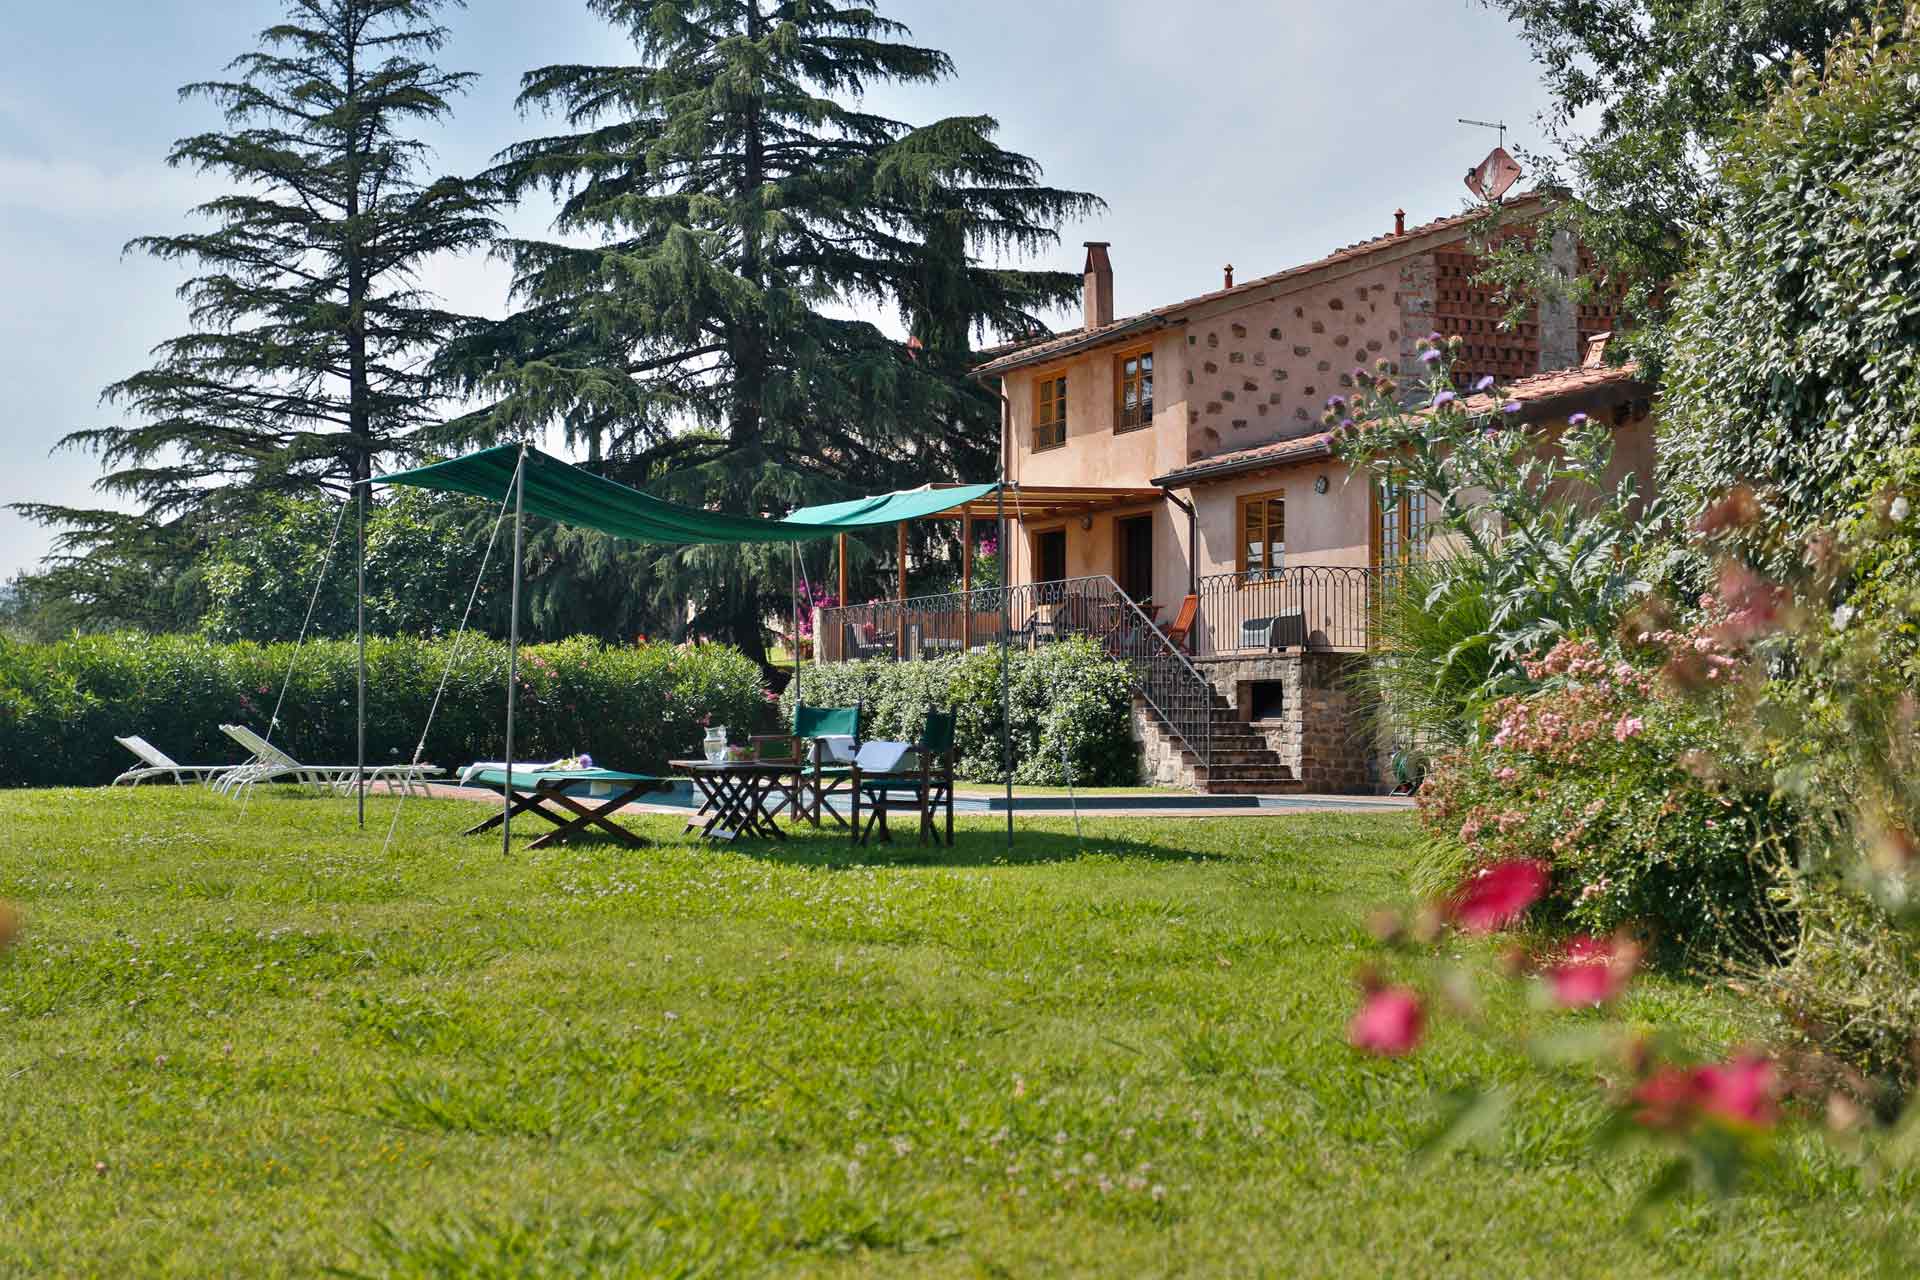 Villa Alya - Tuscany Villas For Rent With Pool In Italy - Aria Journeys